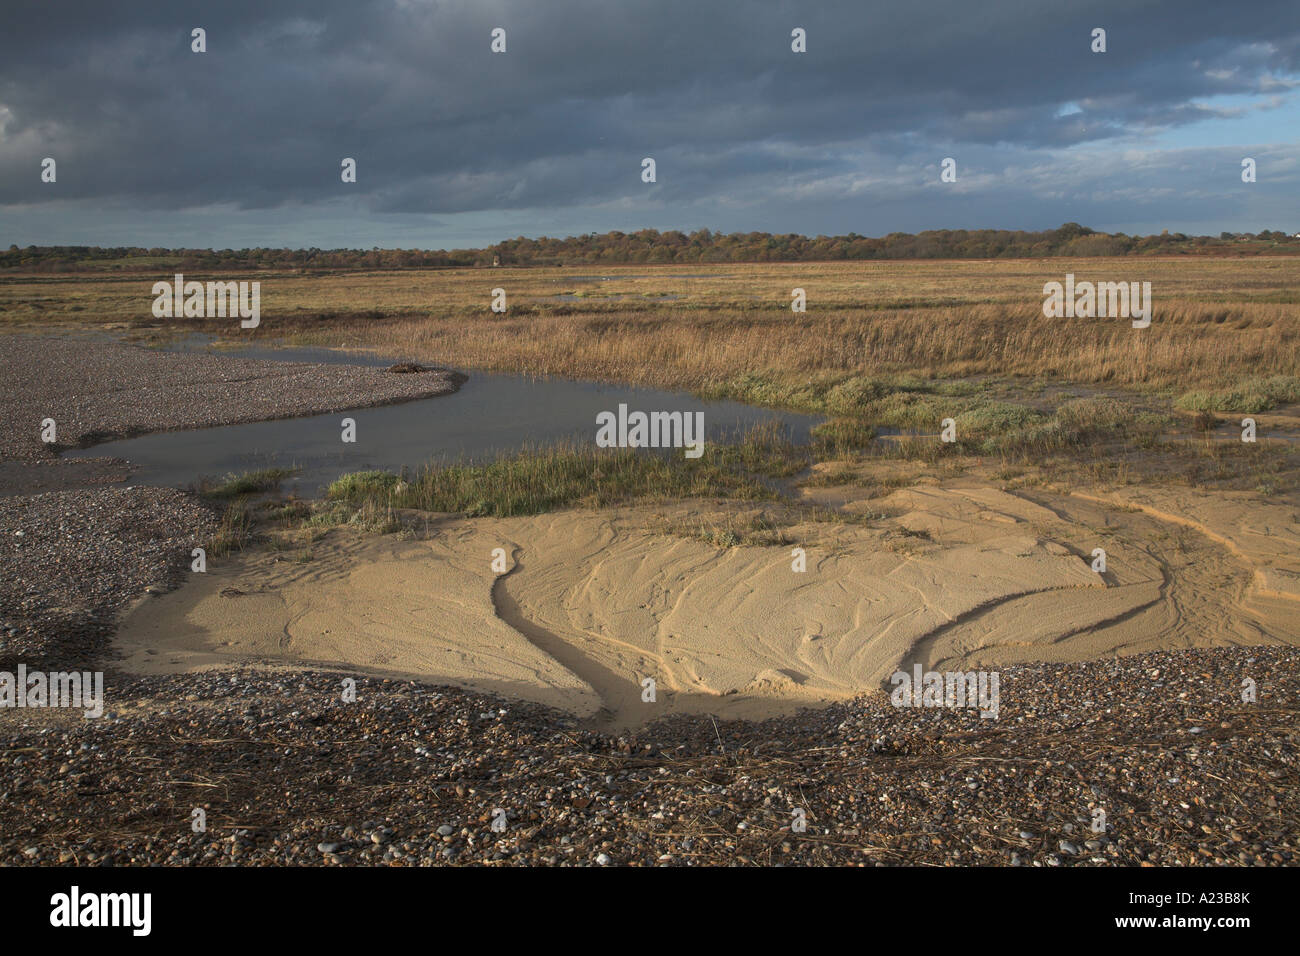 Innundation Dingle marshes by sea water flooding coastal bar breach by storms south of Walberswick, Suffolk, England- Nov 200 Stock Photo